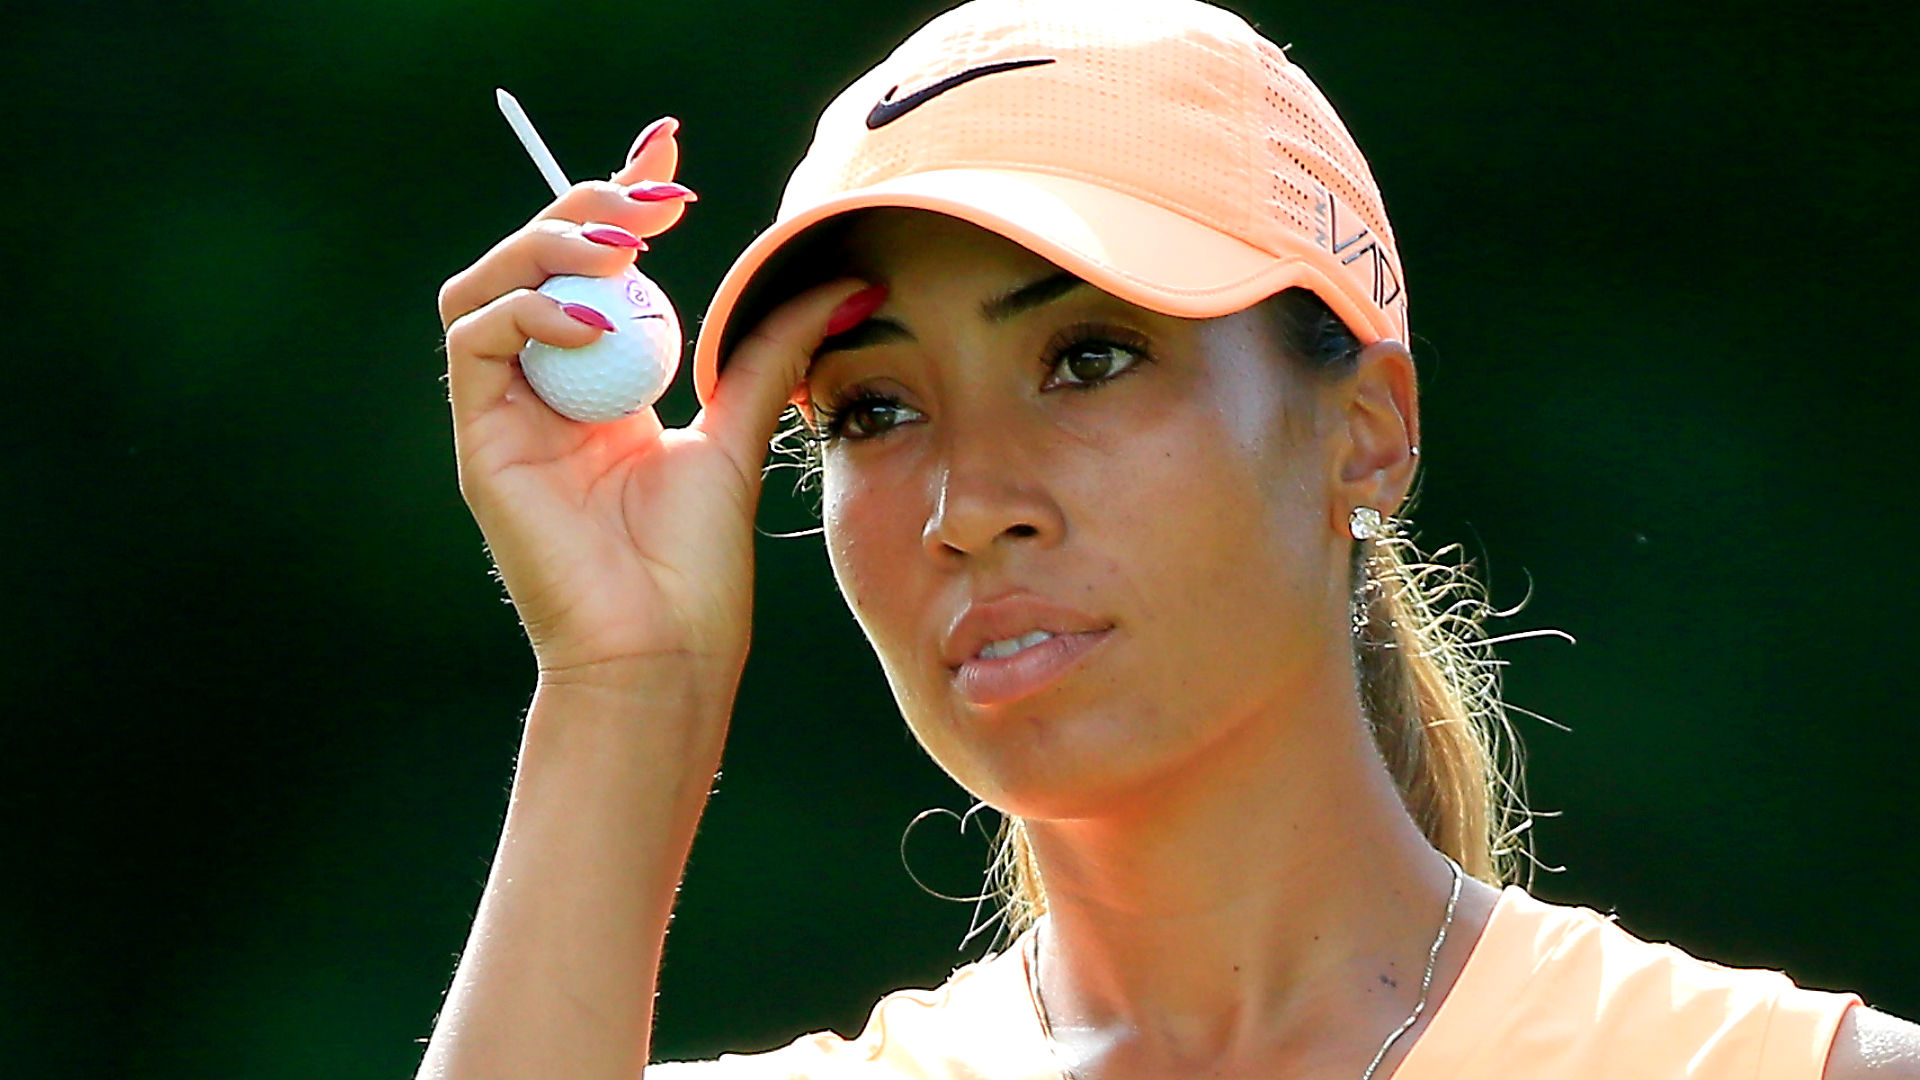 With her new LPGA Tour card, Cheyenne Woods making name for herself.